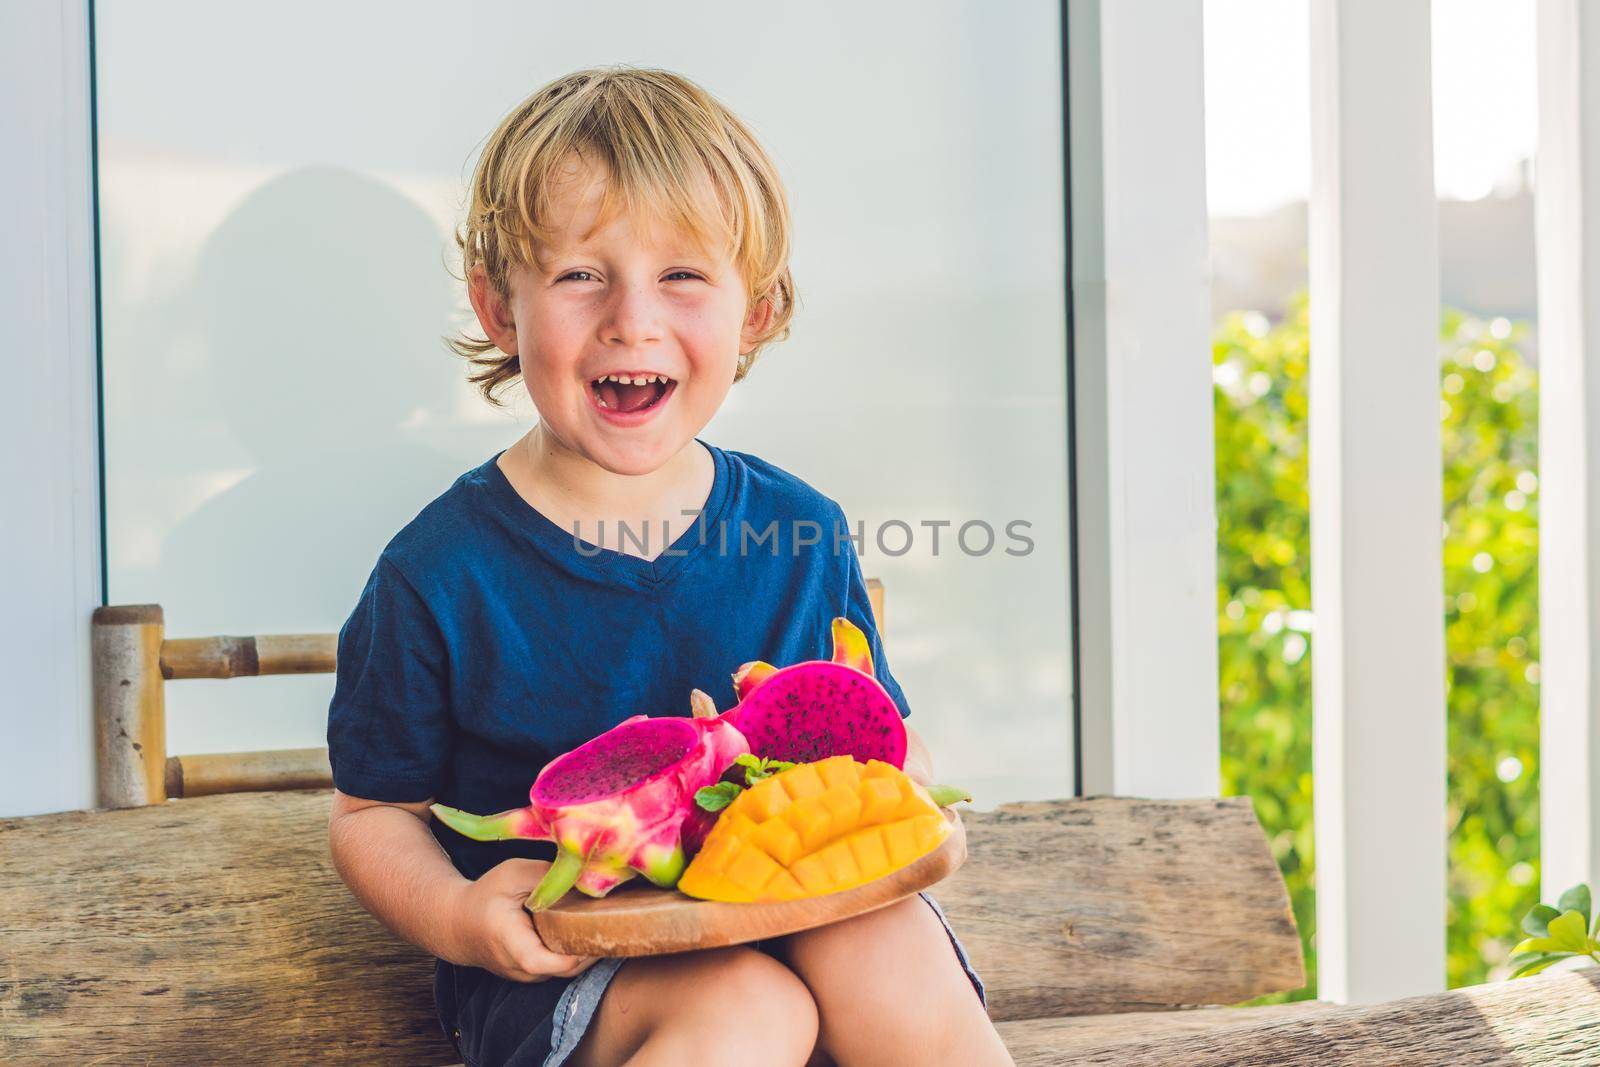 Diced dragon fruit and mango in the hands of the boy by galitskaya